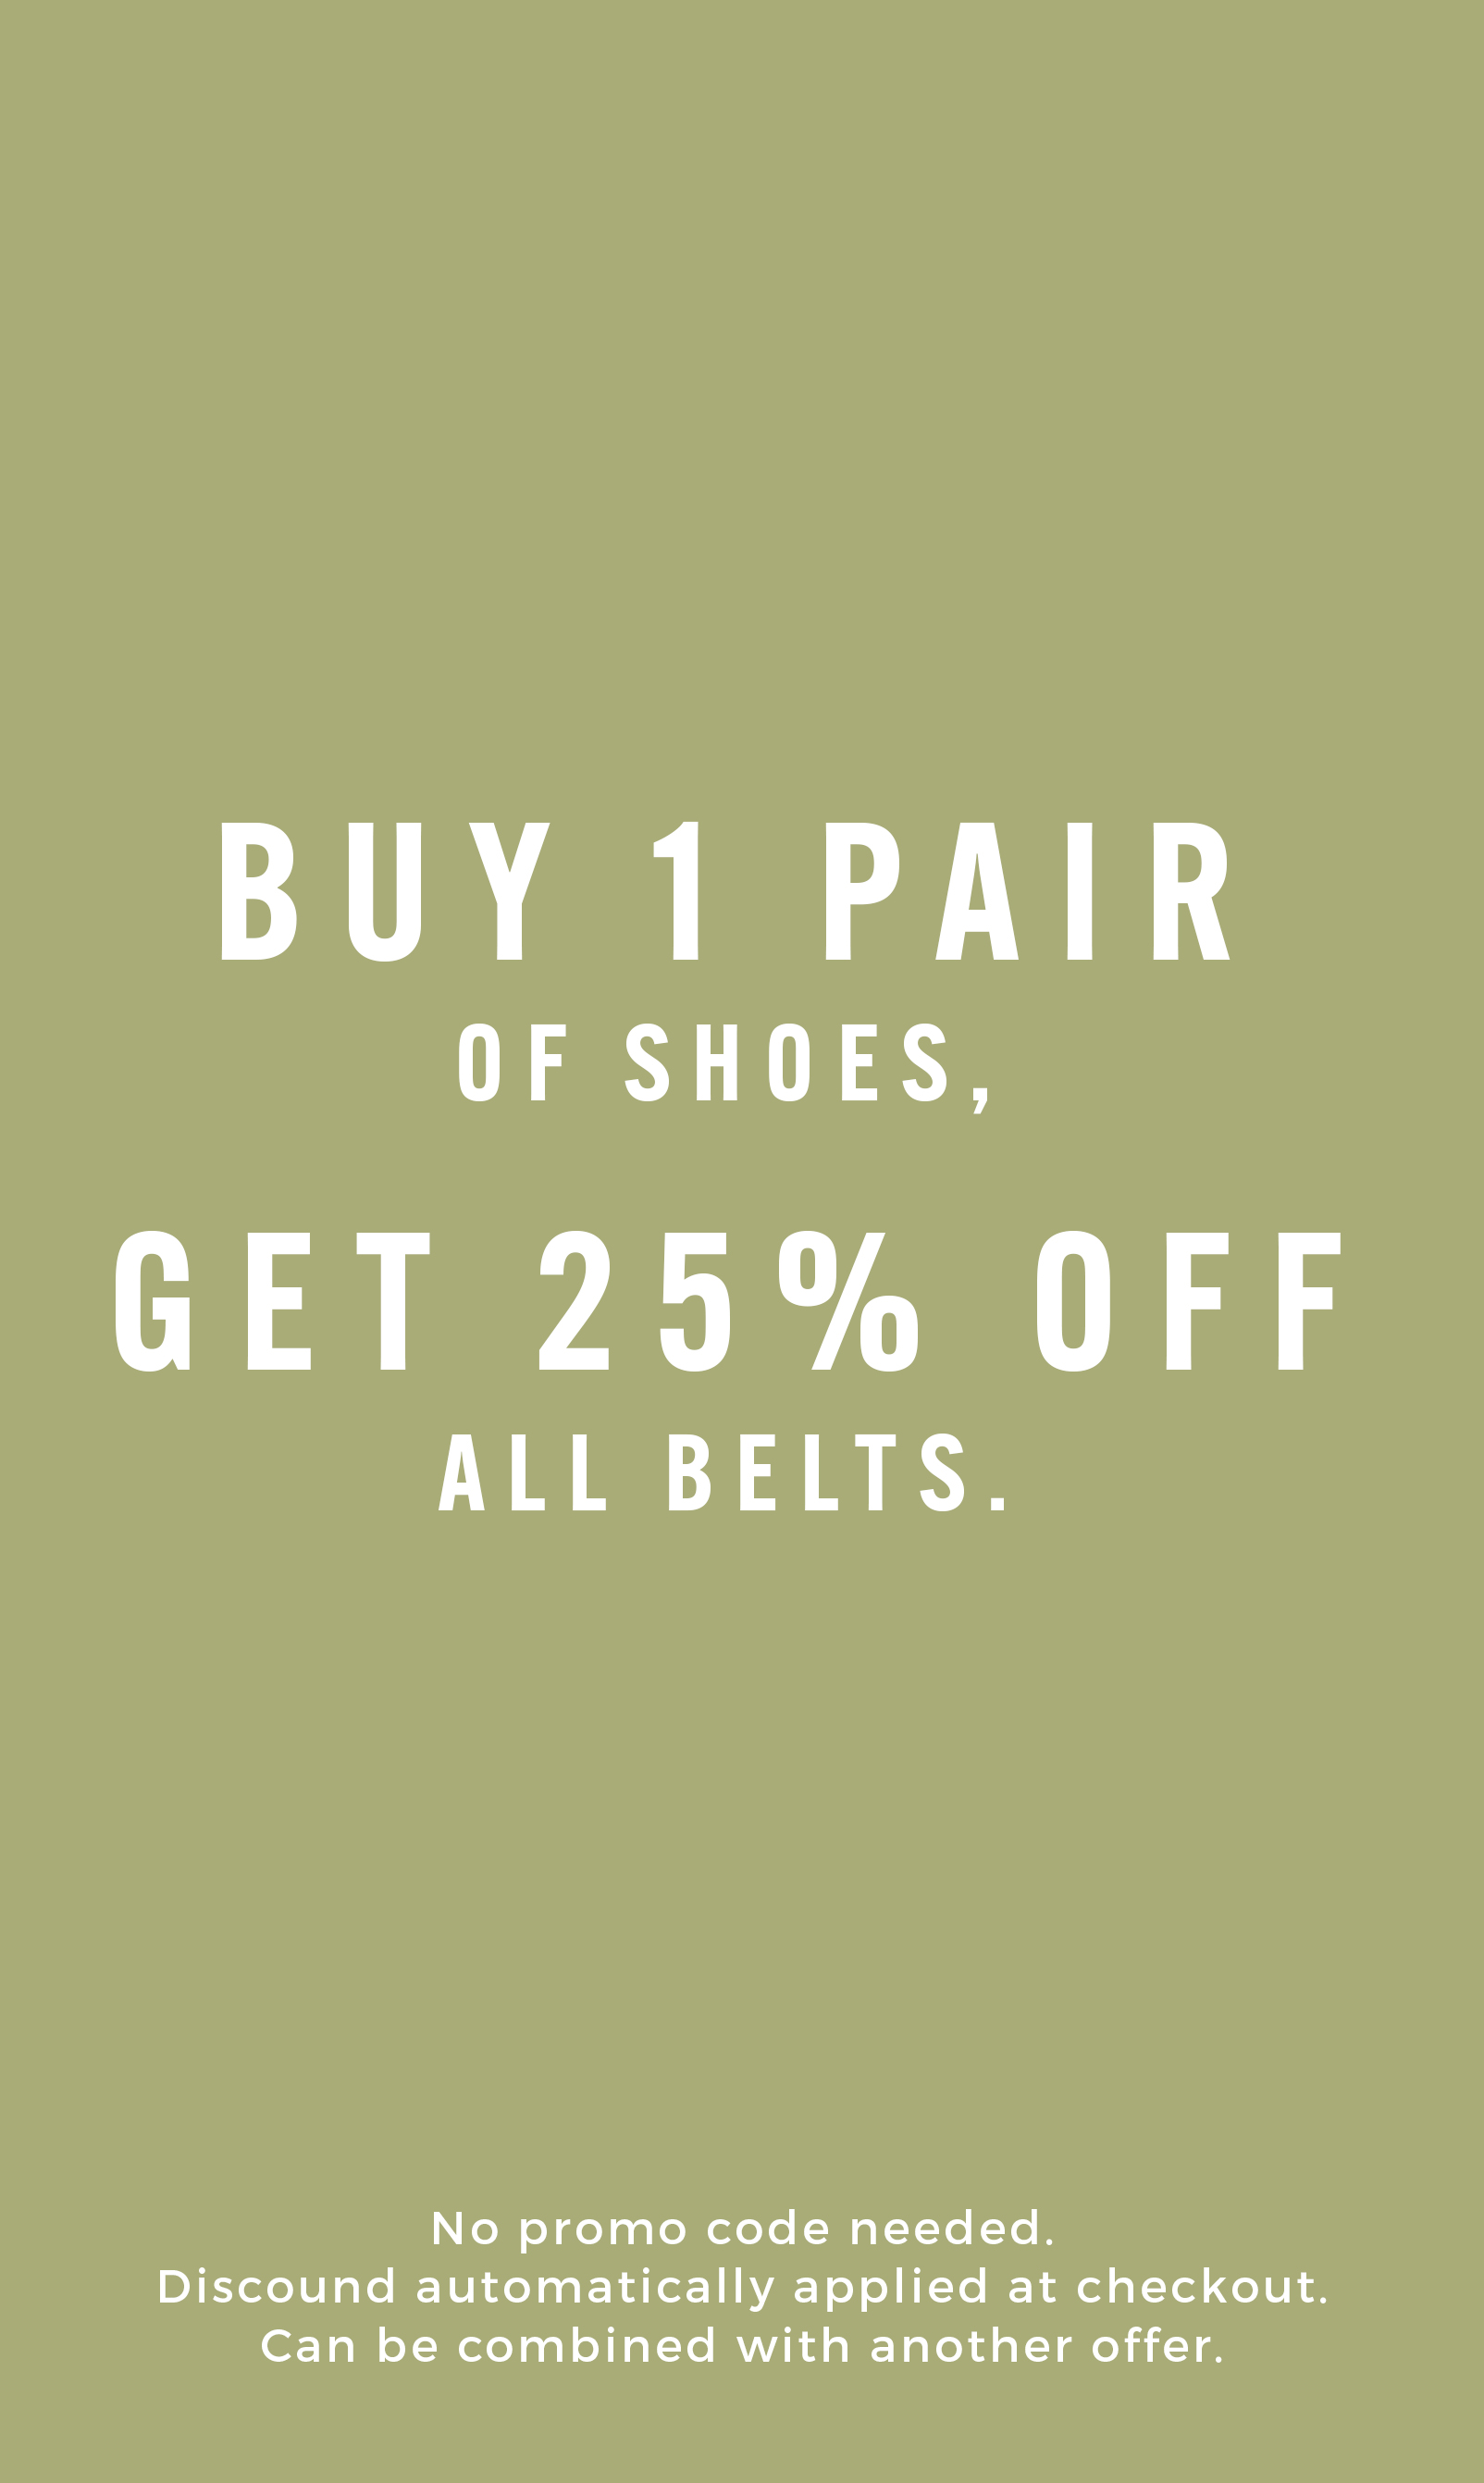 Men's Belts category. Buy 1 pair of shoes, get 25% off all belts. No promo code needed. The image features a few Florsheim belts in a variety of colors. 